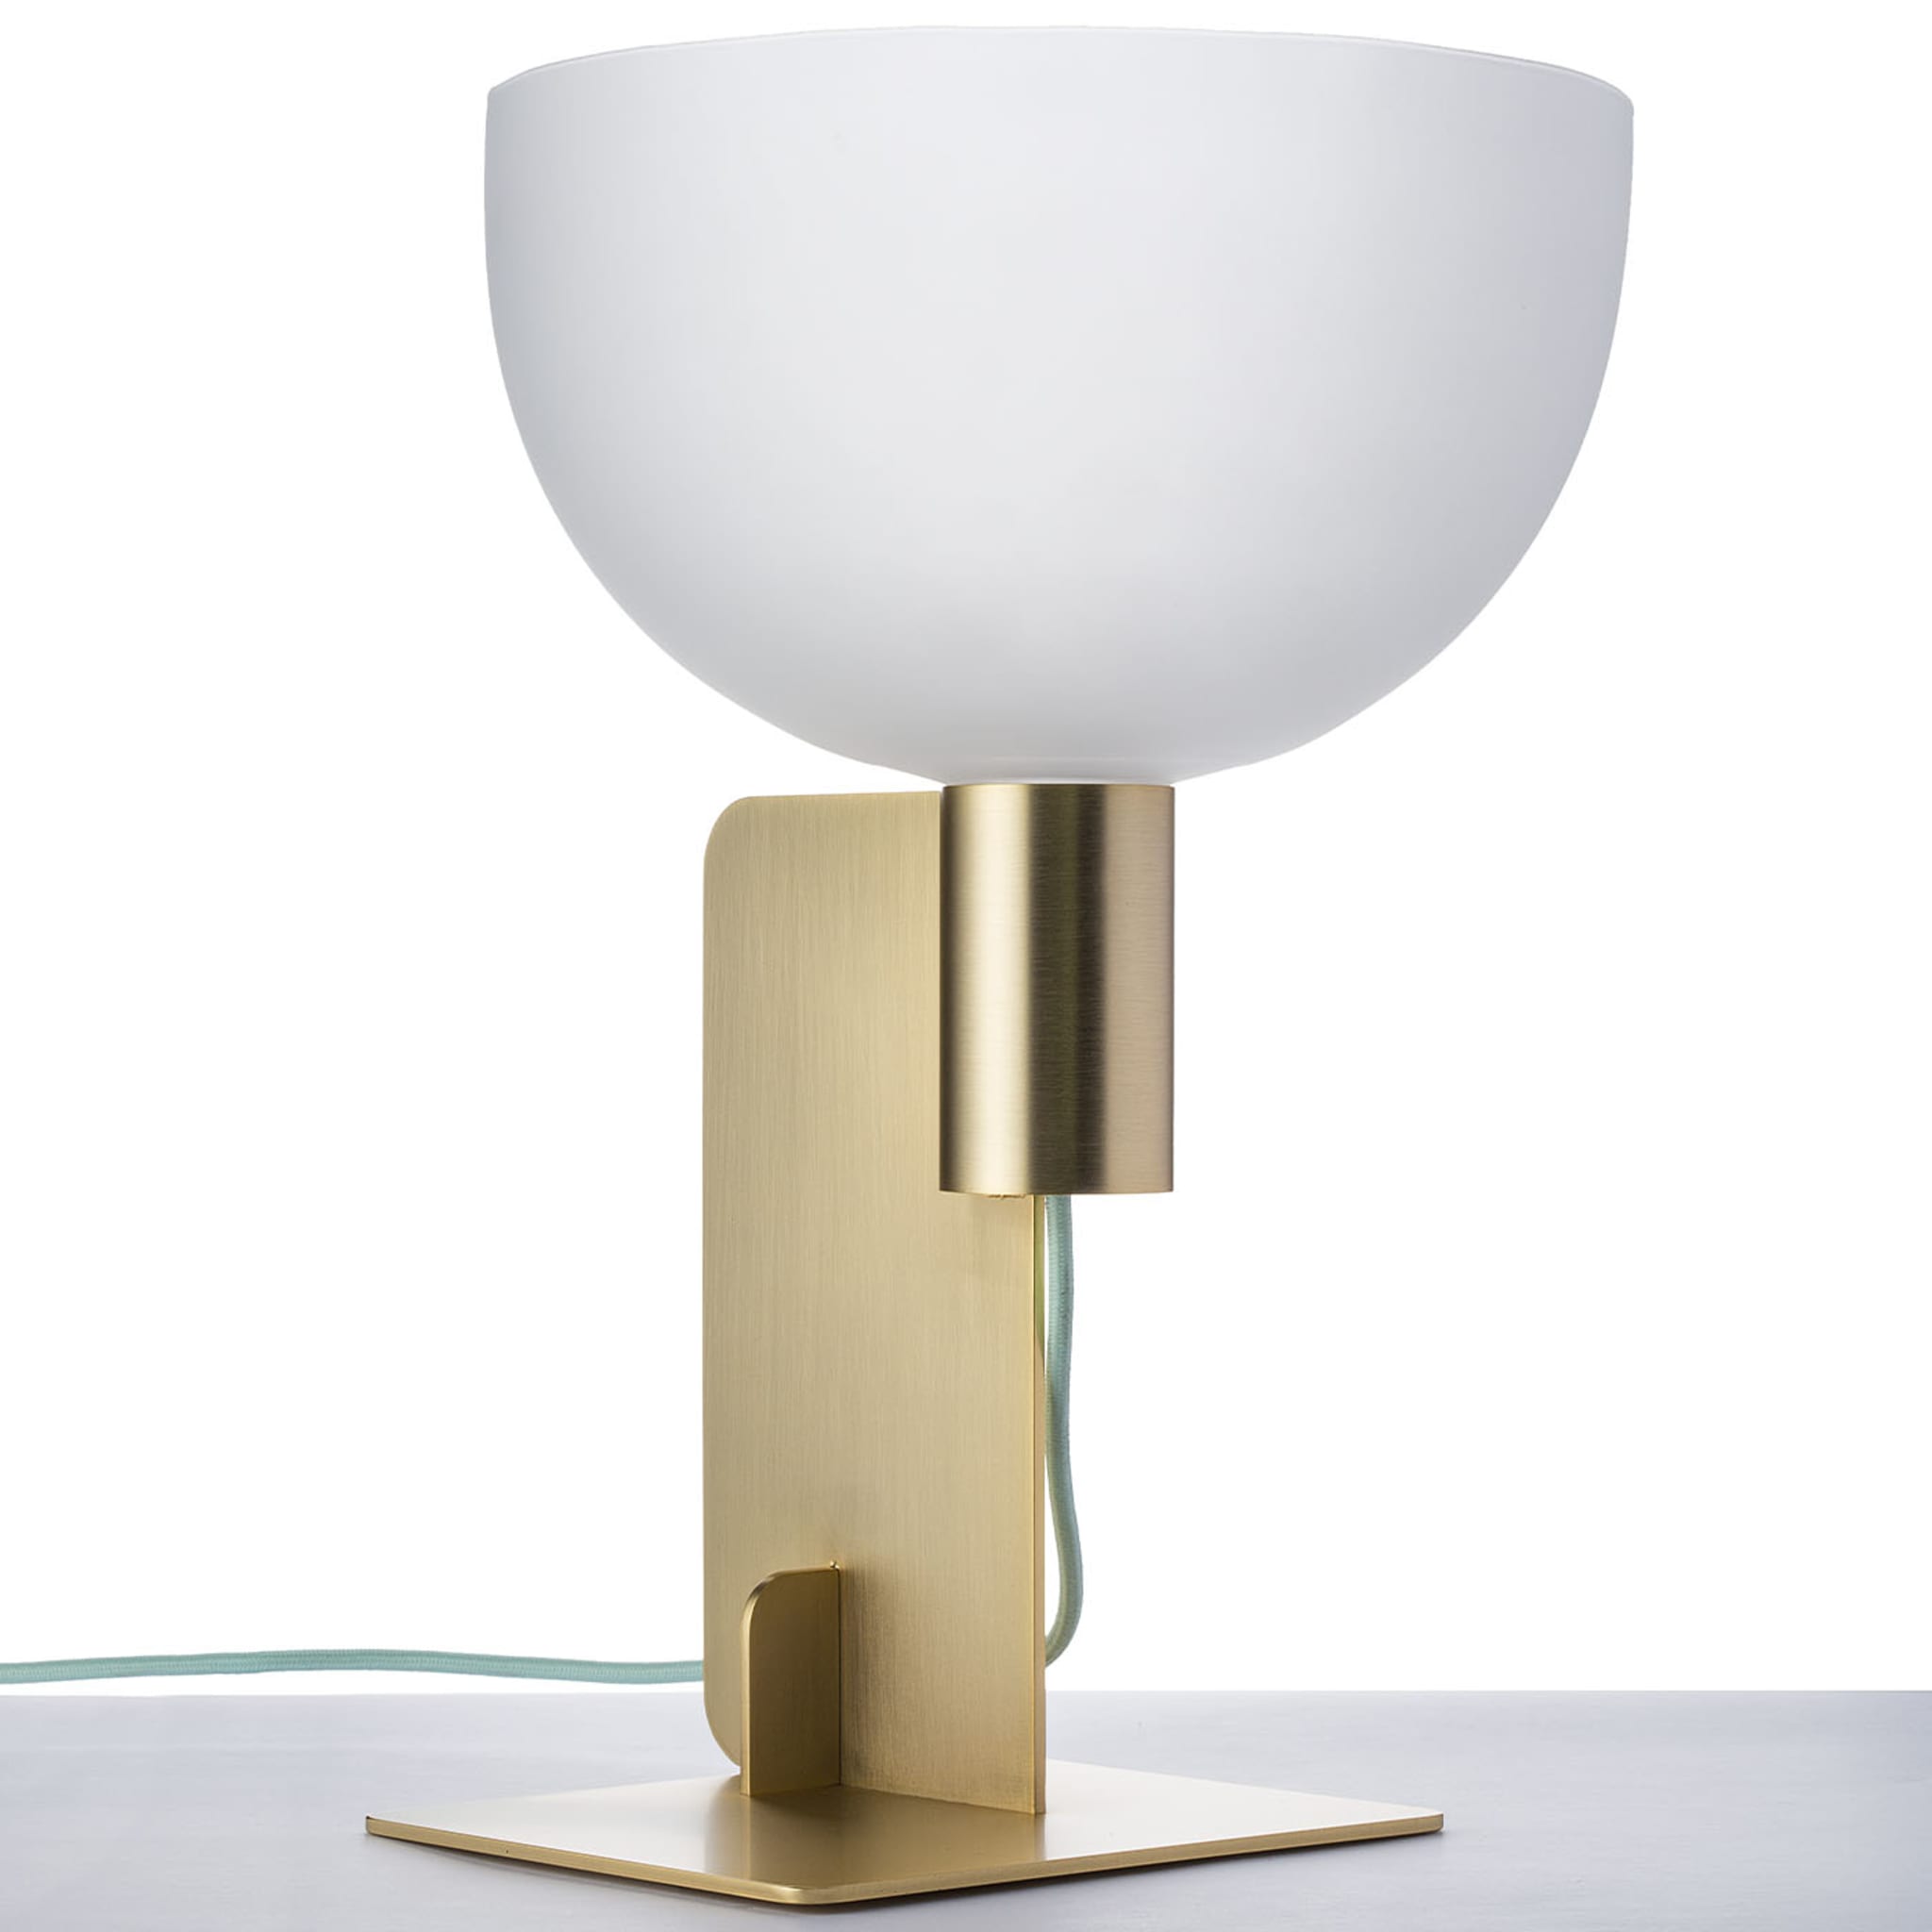 Olimpia Table Lamp by Zaven  - Alternative view 1